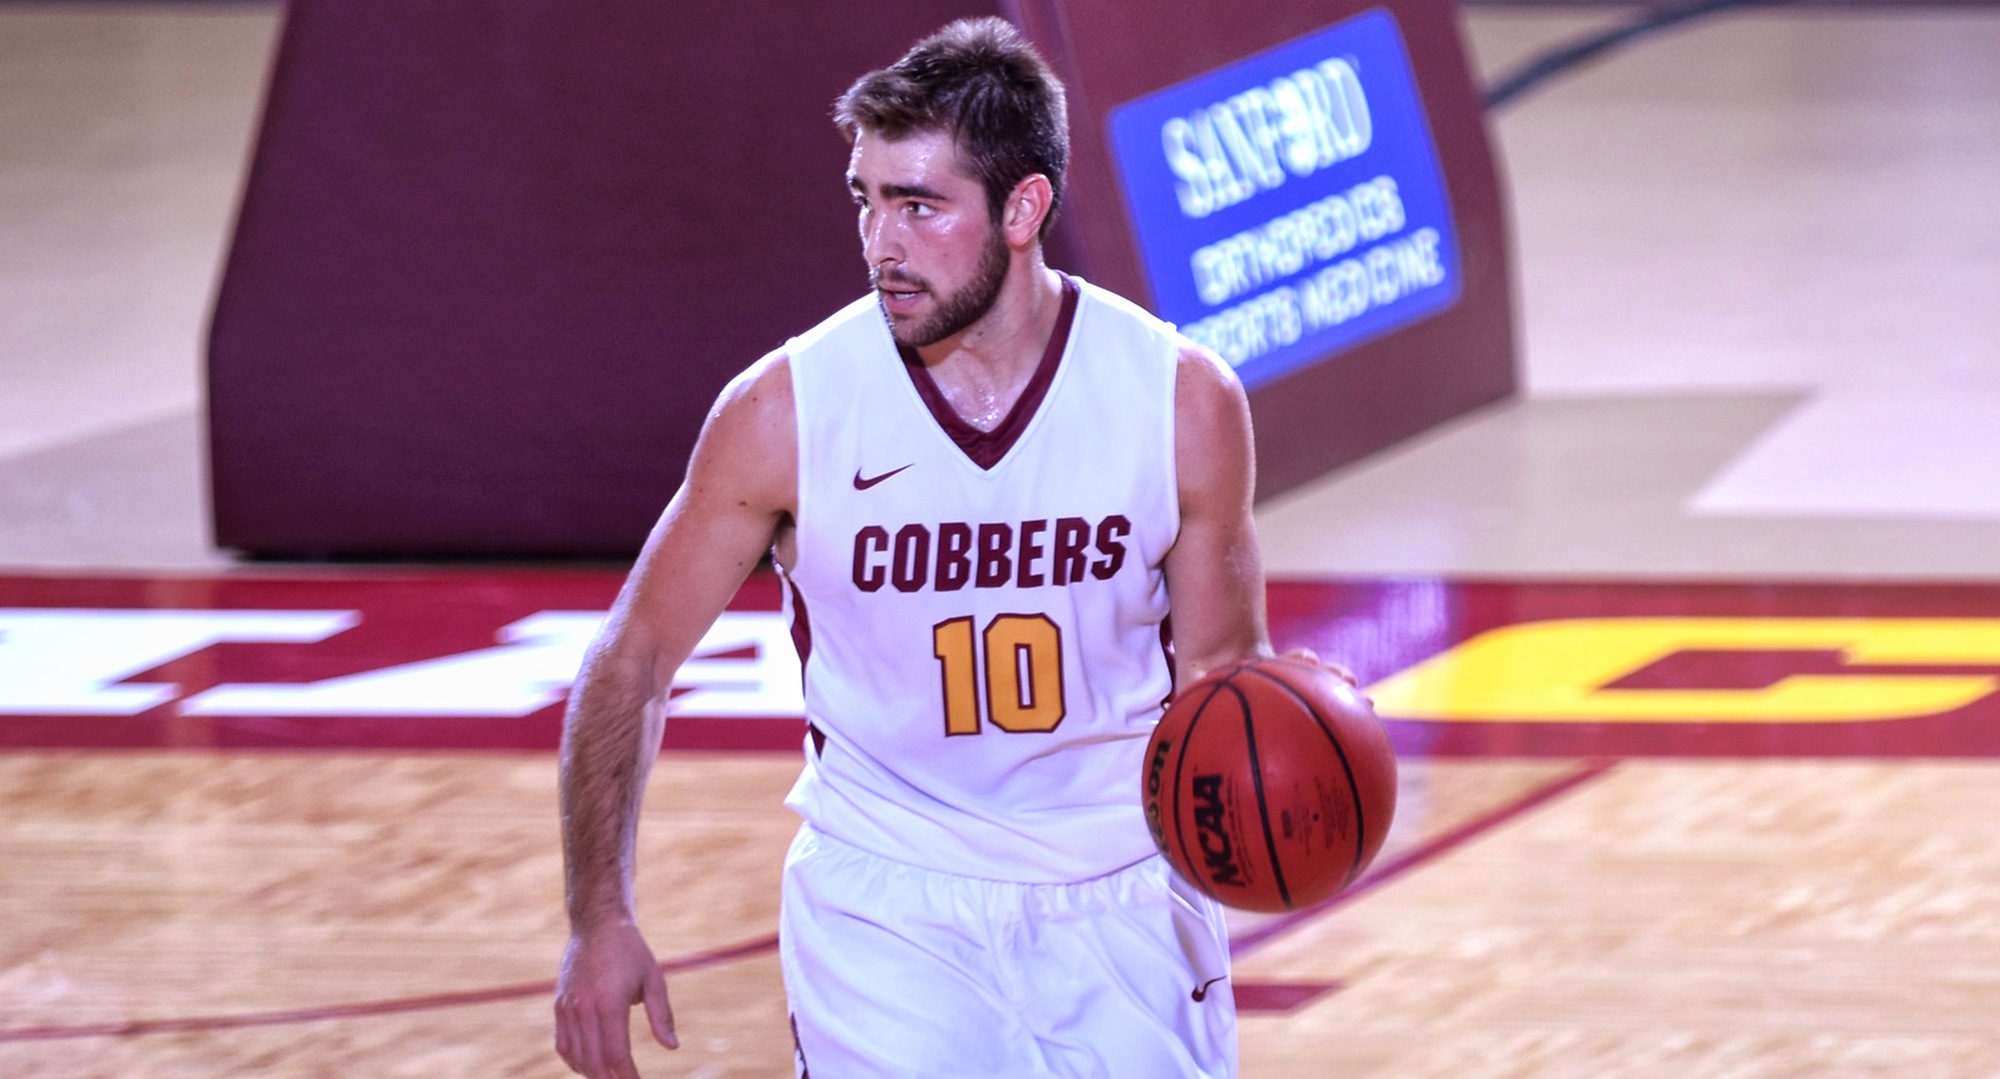 Senior Tommy Schyma had a game-high 25 points in the Cobbers' game at Wis.Superior. He is averaging 26.0 points in the first two games of the year.